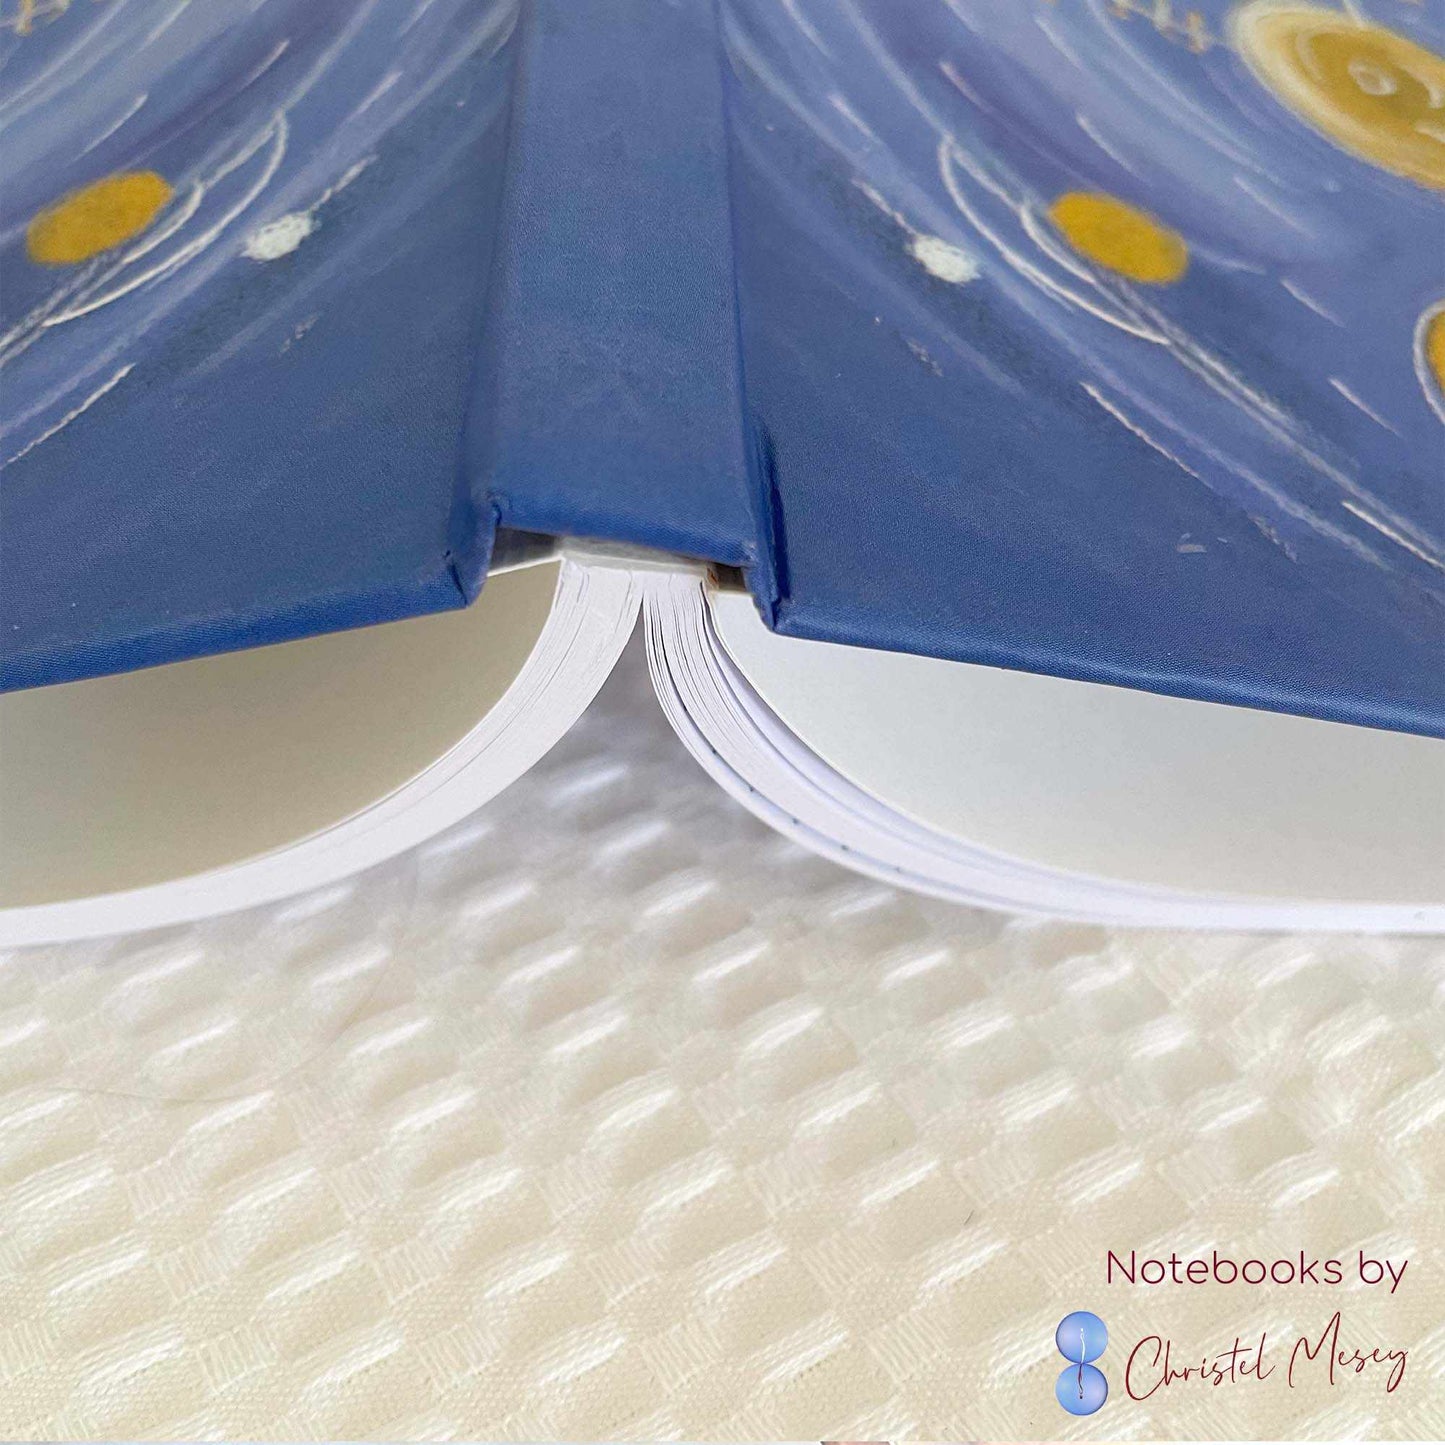 Get Back To Centre - Notebook - Hardcover & dotted pages - Christel Mesey Art